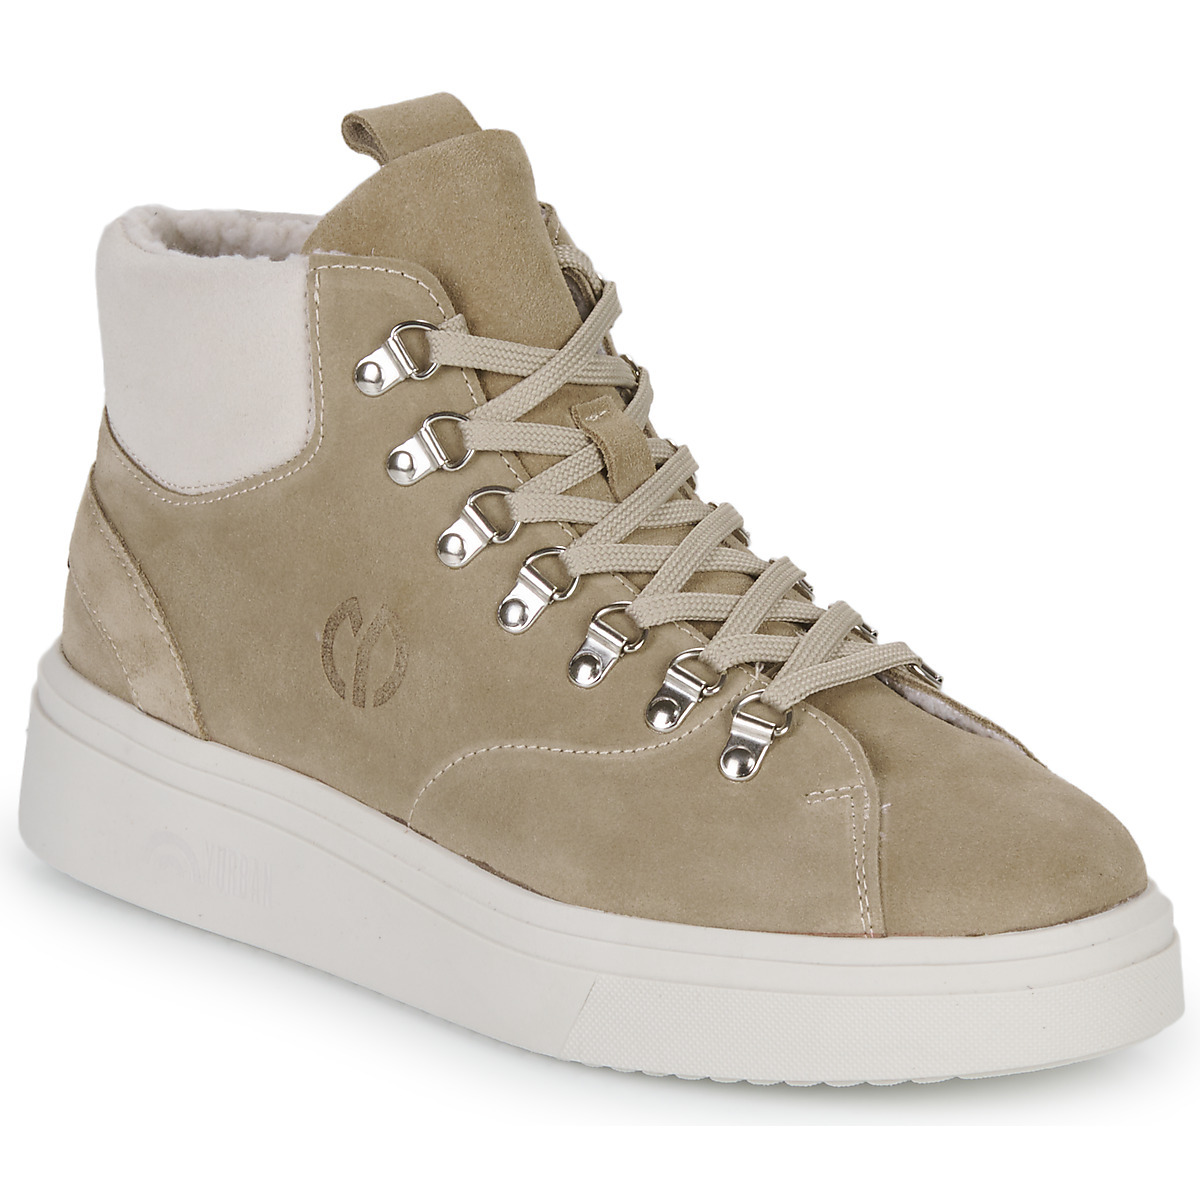 Sneakers in Beige for Man by Spartoo GOOFASH